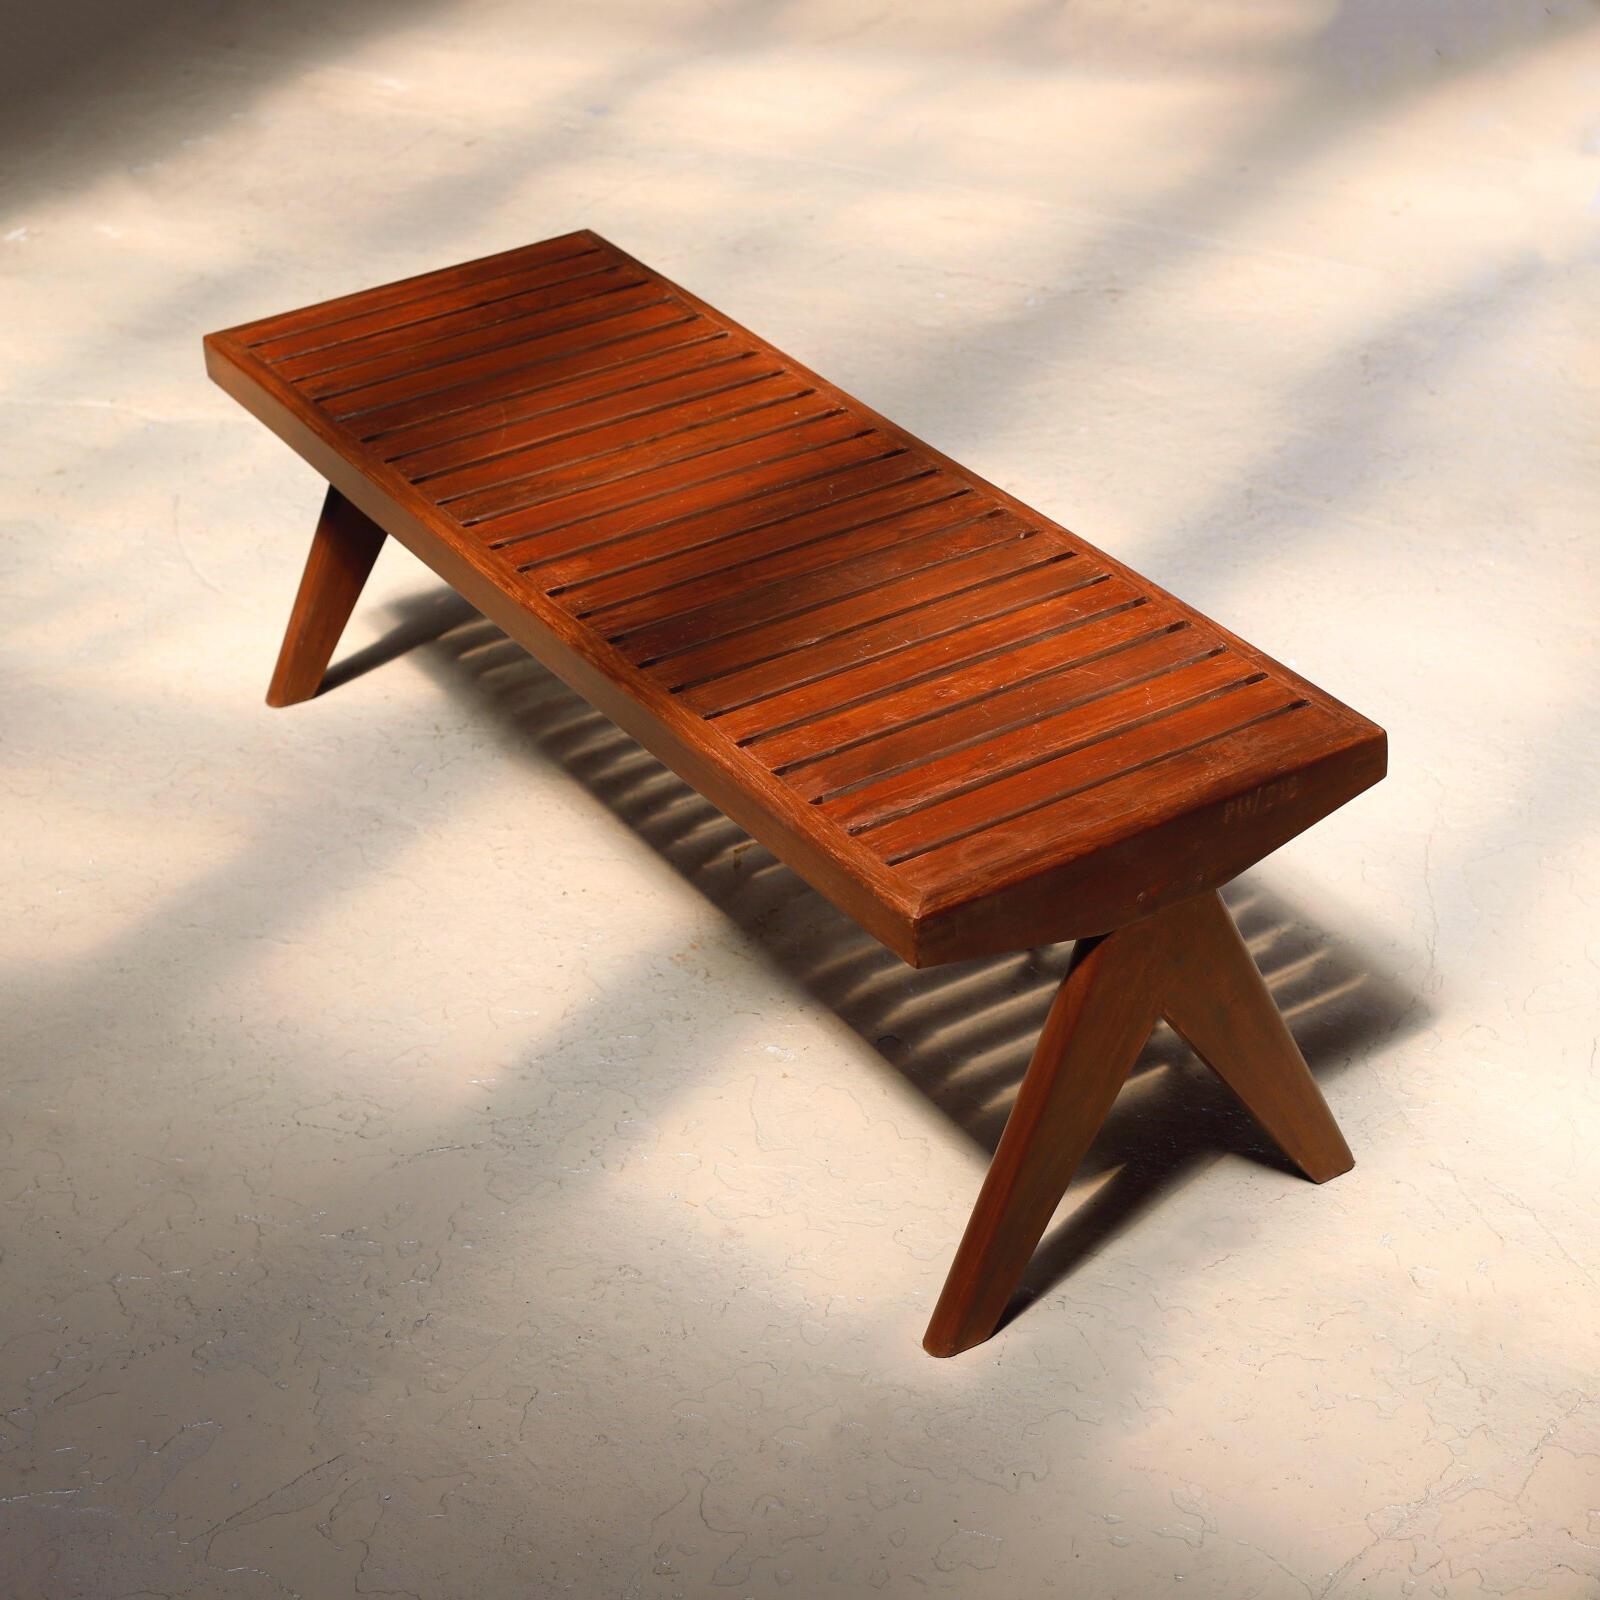 Bench with slats designed by Pierre Jeanneret, circa 1960s.
Teak wood.